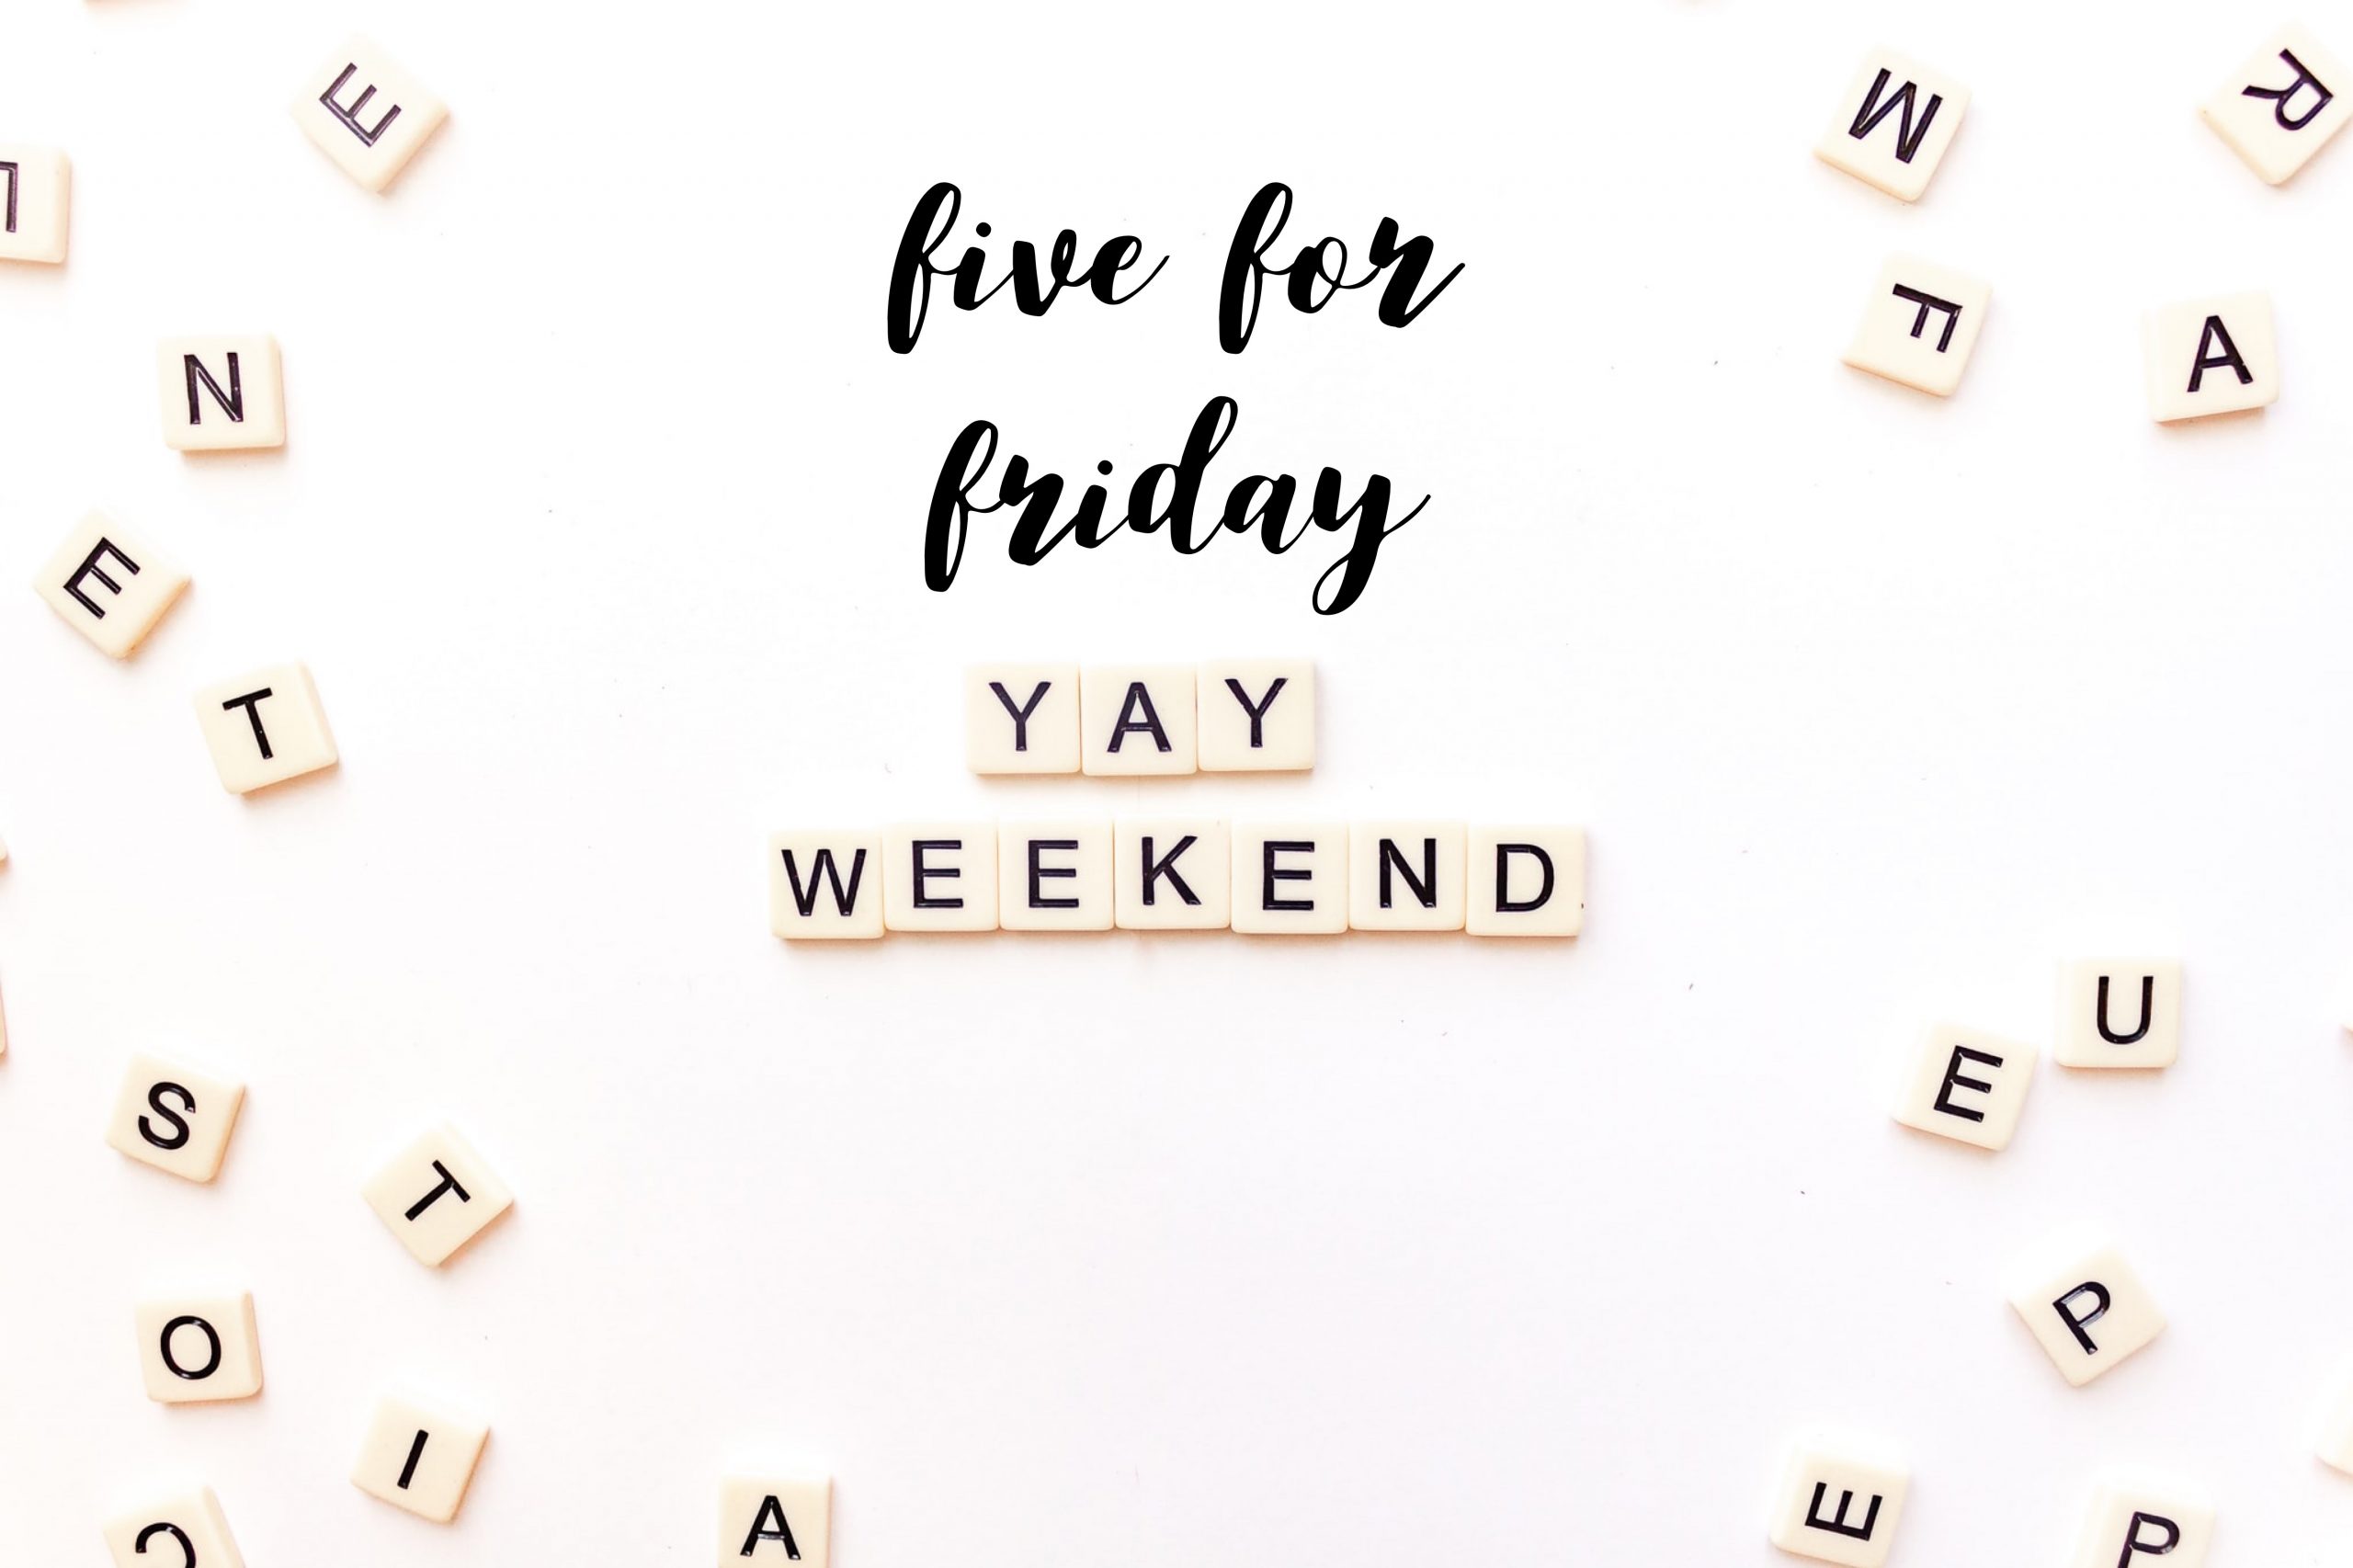 Five for Friday weekend